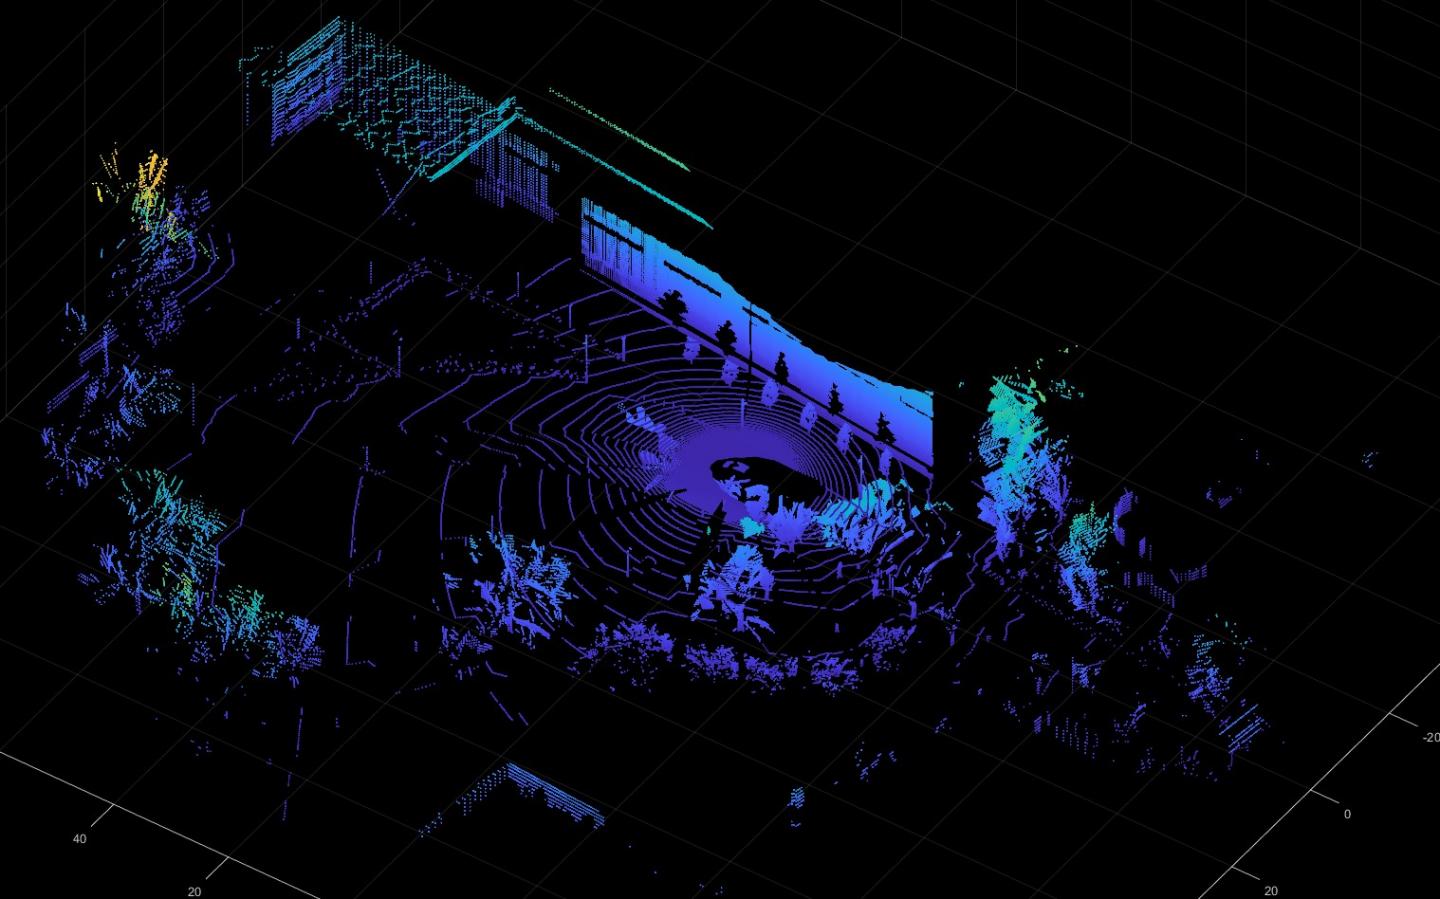 A virtual scan of the NAIC building generated with Intelligent Vehicle Group's LiDAR model